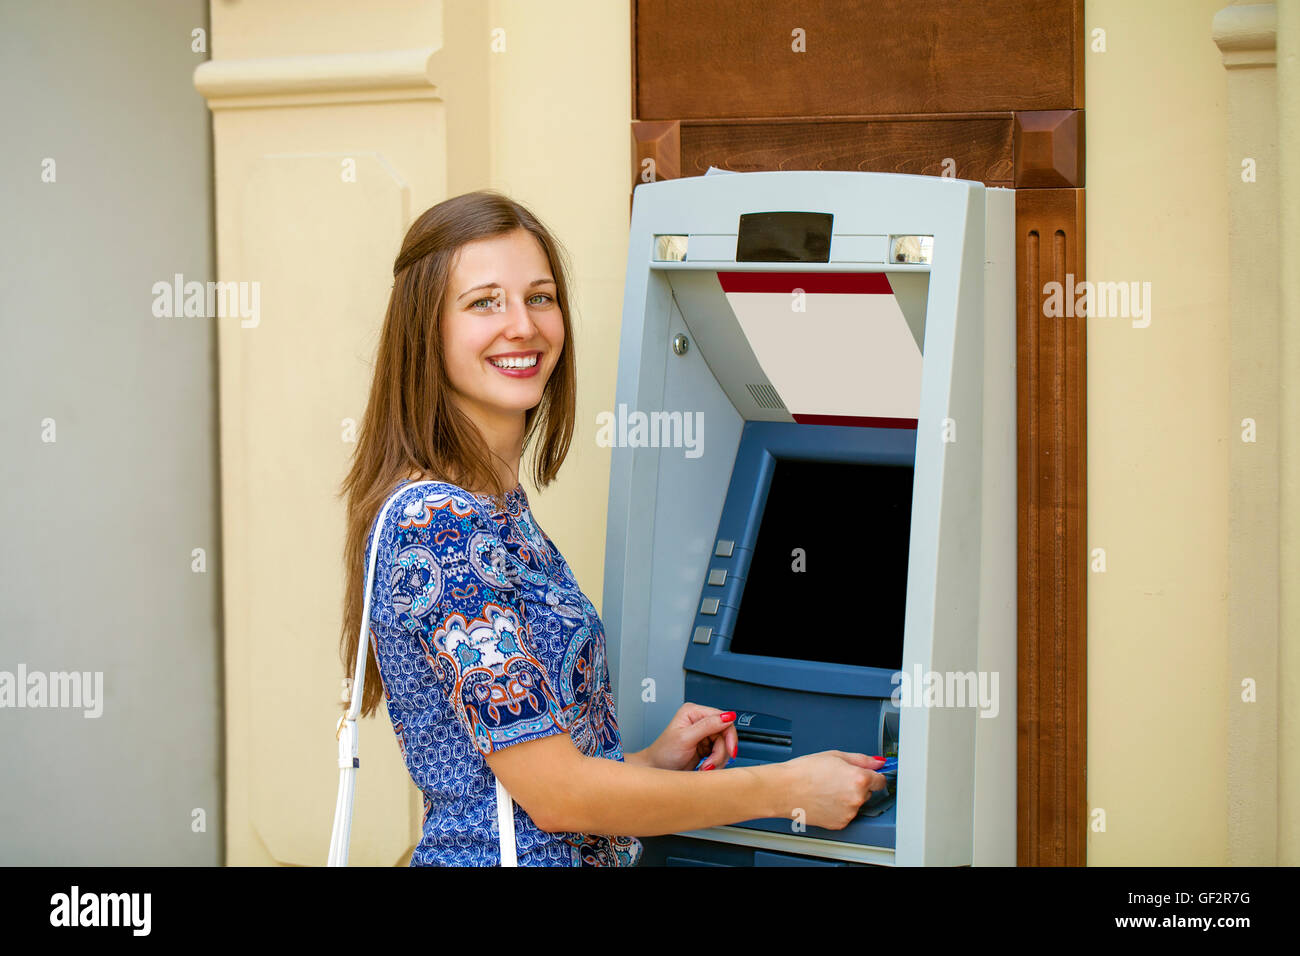 Brunette young lady using an automated teller machine. Woman withdrawing money or checking account balance Stock Photo